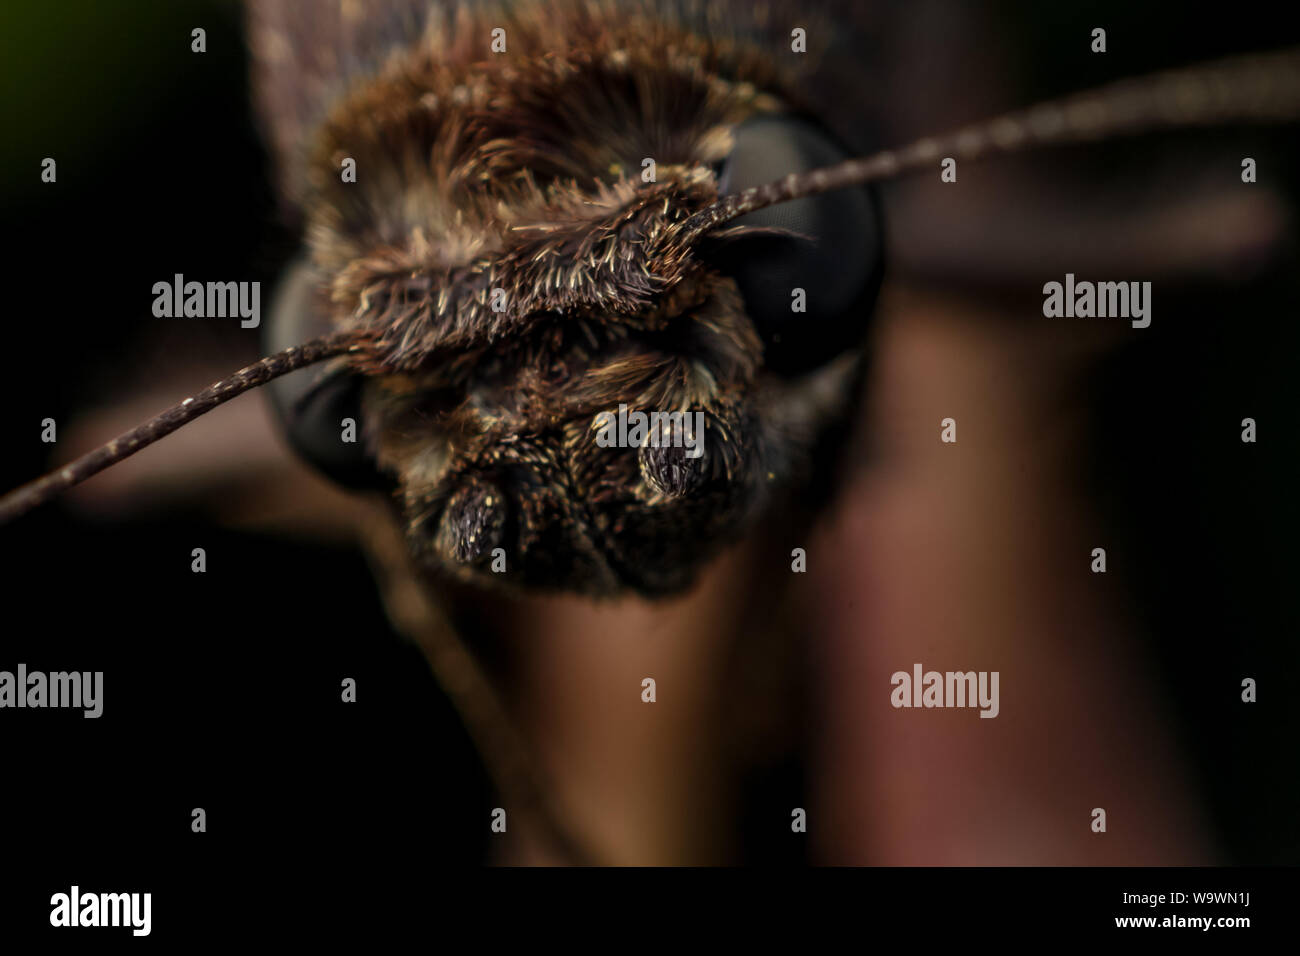 Extreme macro of a moth head, showing the insect scales in detail (lepidoptera) Stock Photo